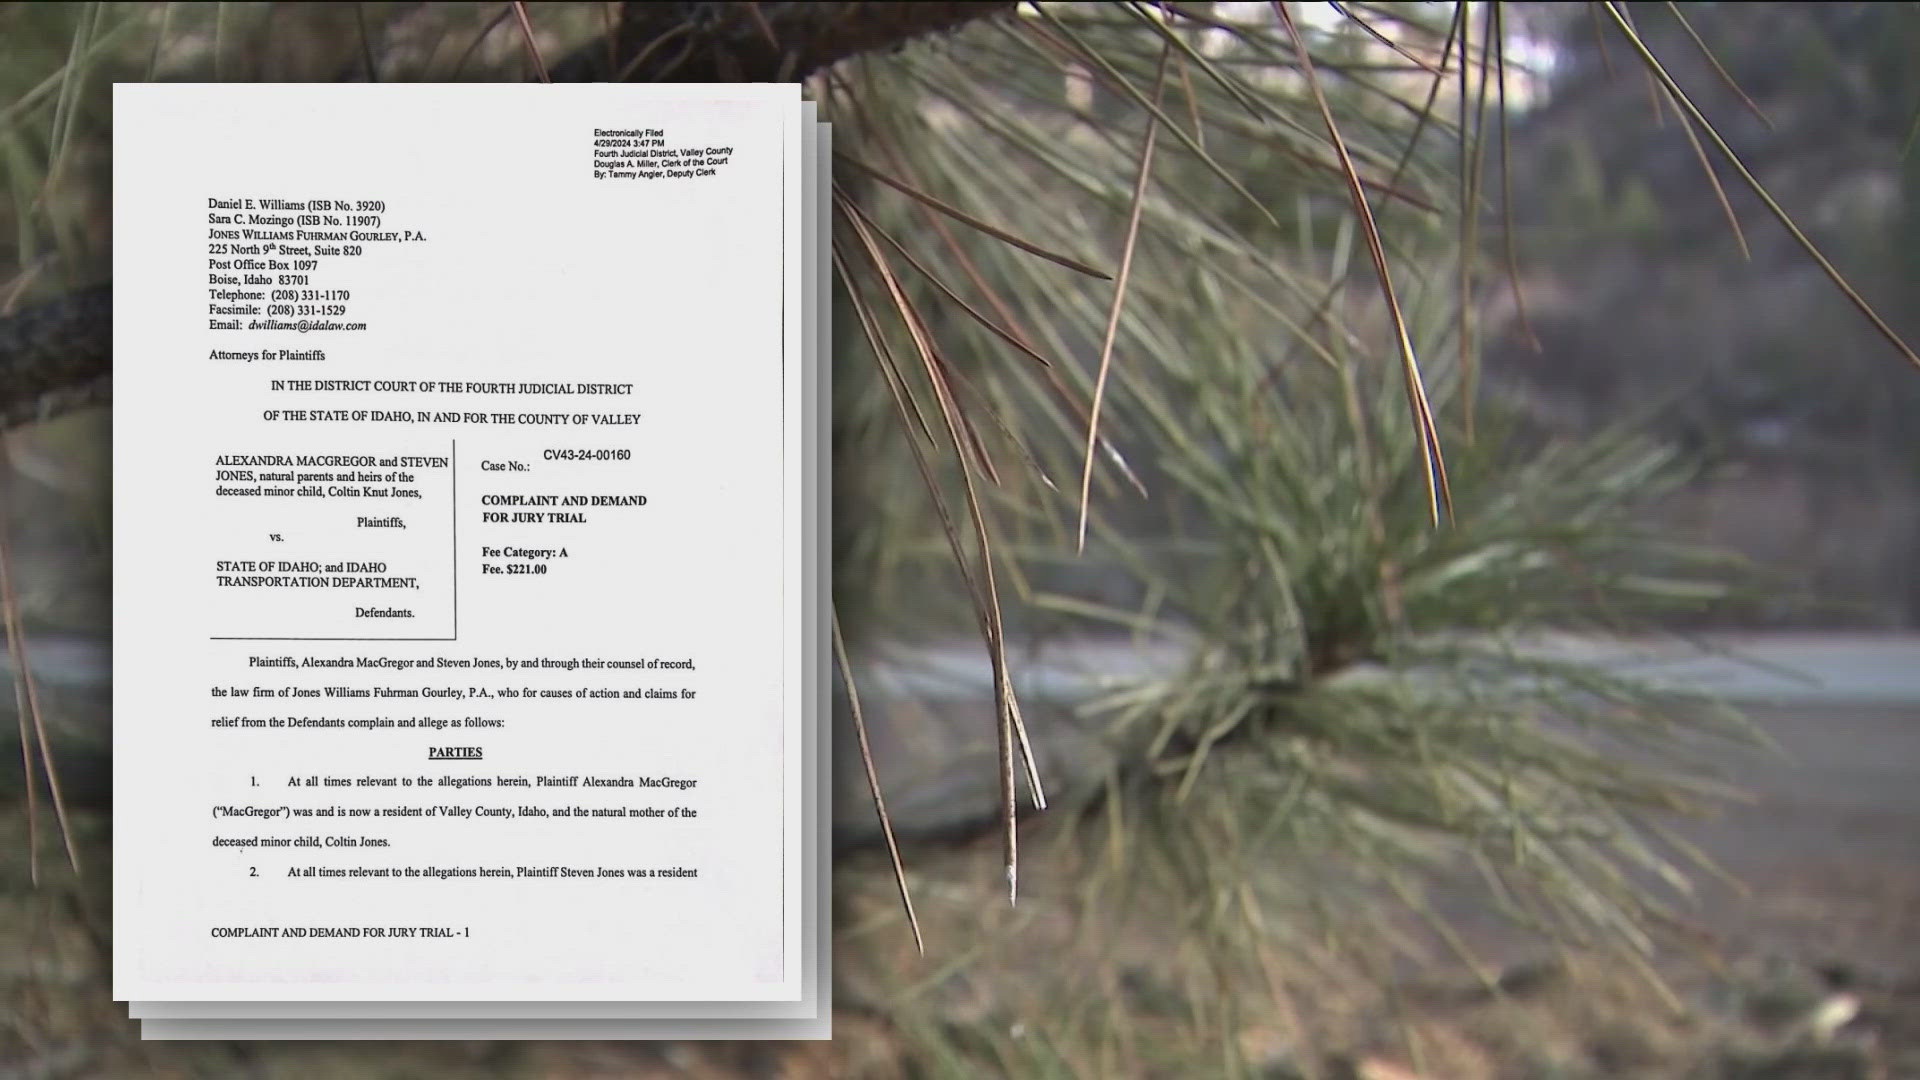 The parents claim ITD was negligent in removing dangerous and dead trees.